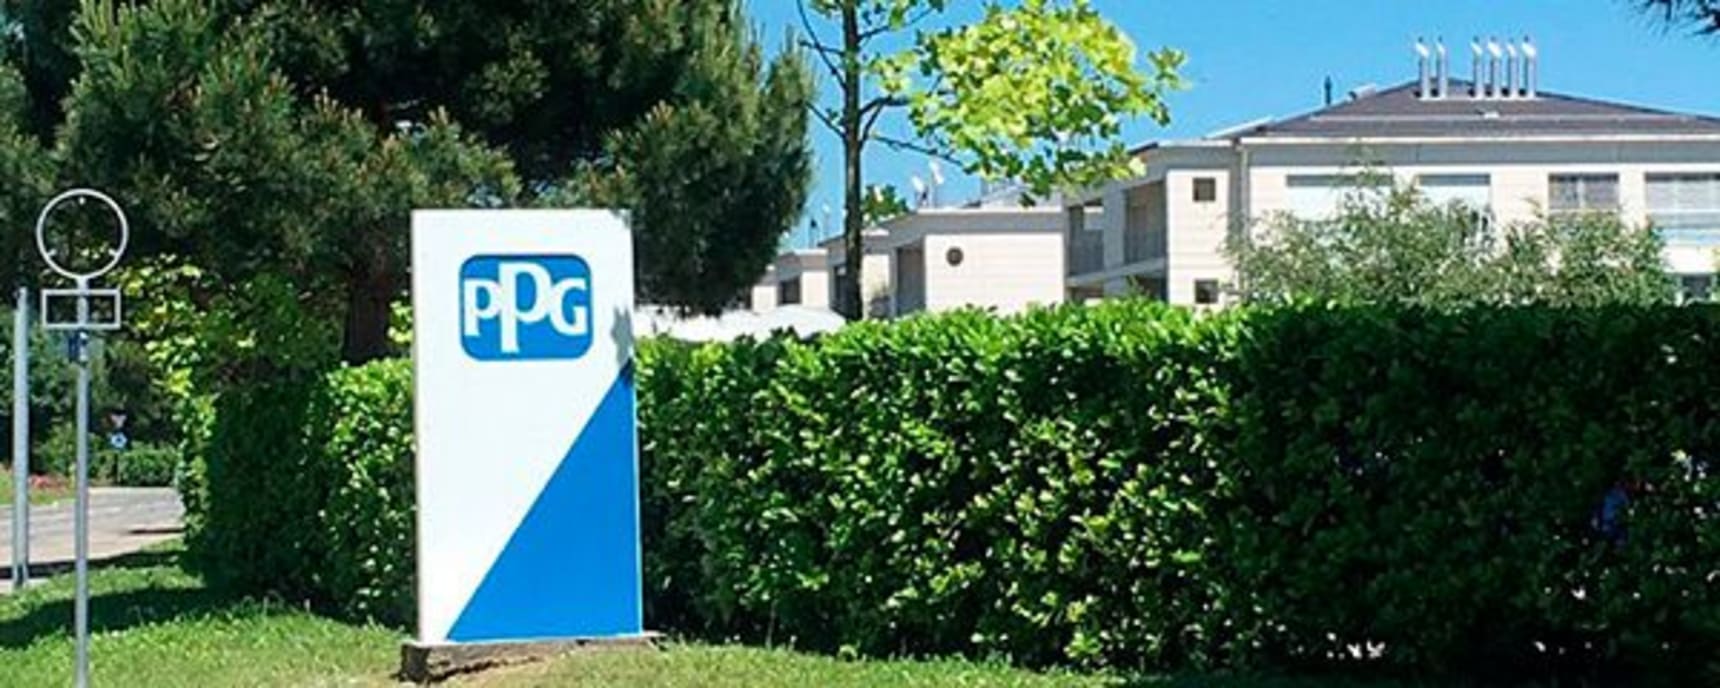 PPG Industries banner